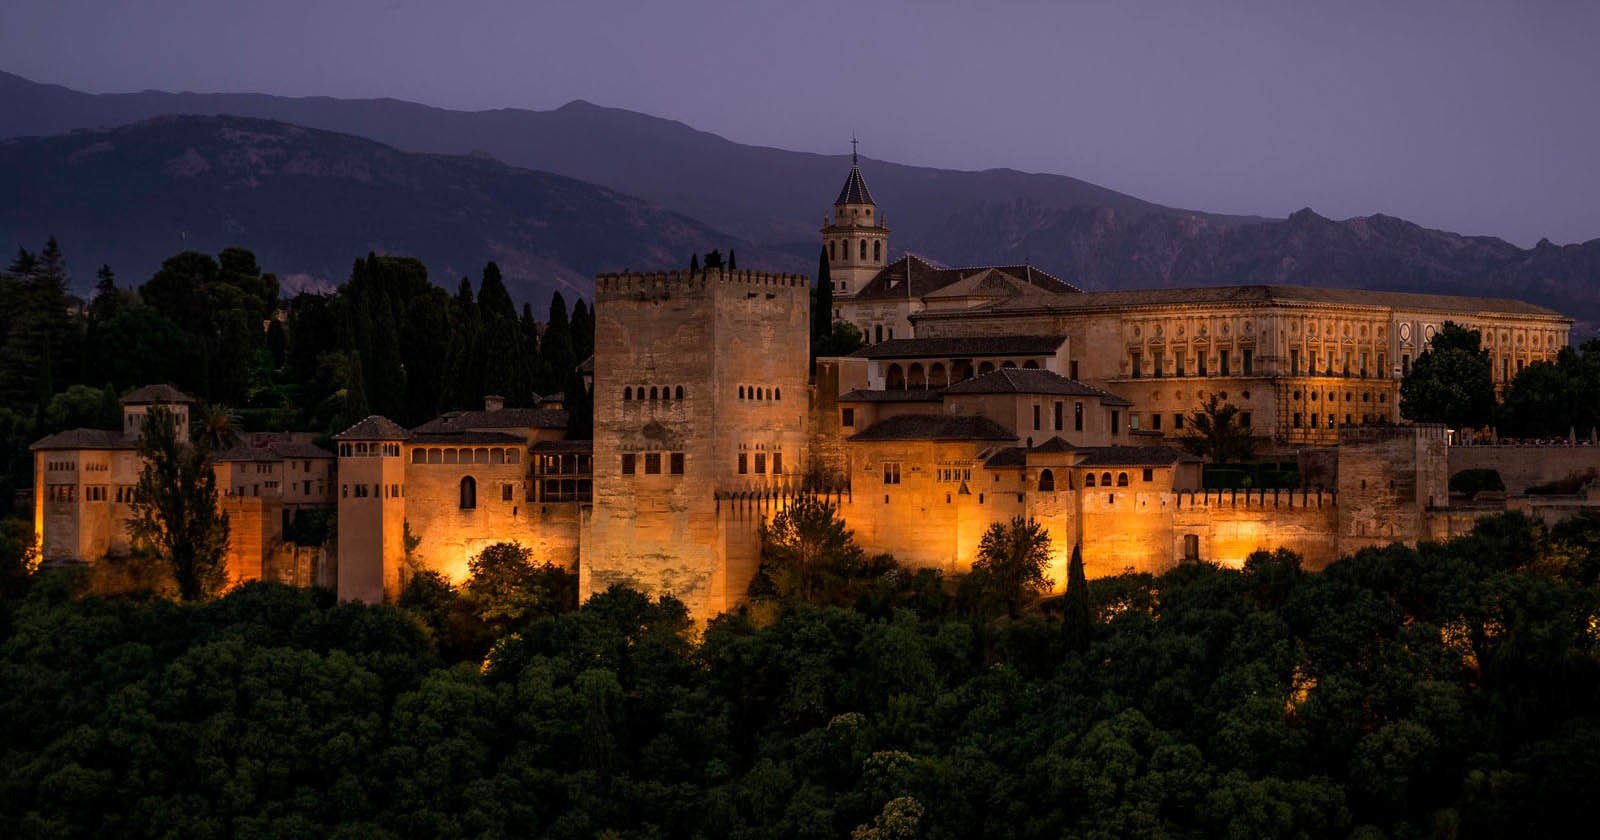 Red Castle: A Photographers View of the Iconic Alhambra in Spain